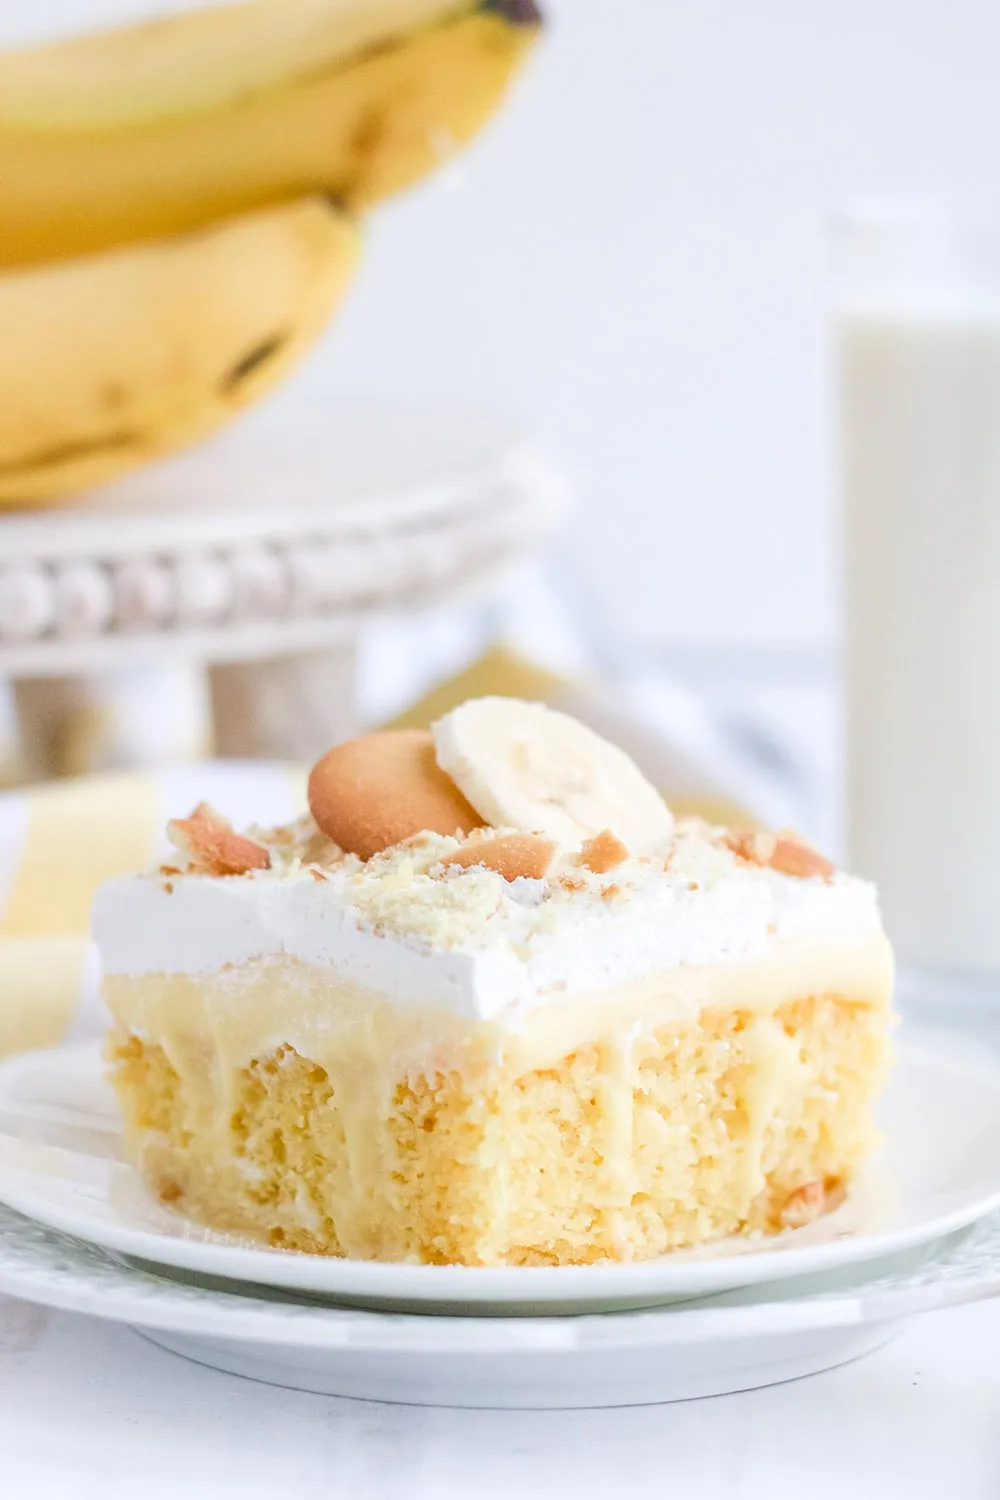 Yellow cake on a white plate with bananas and cookies.